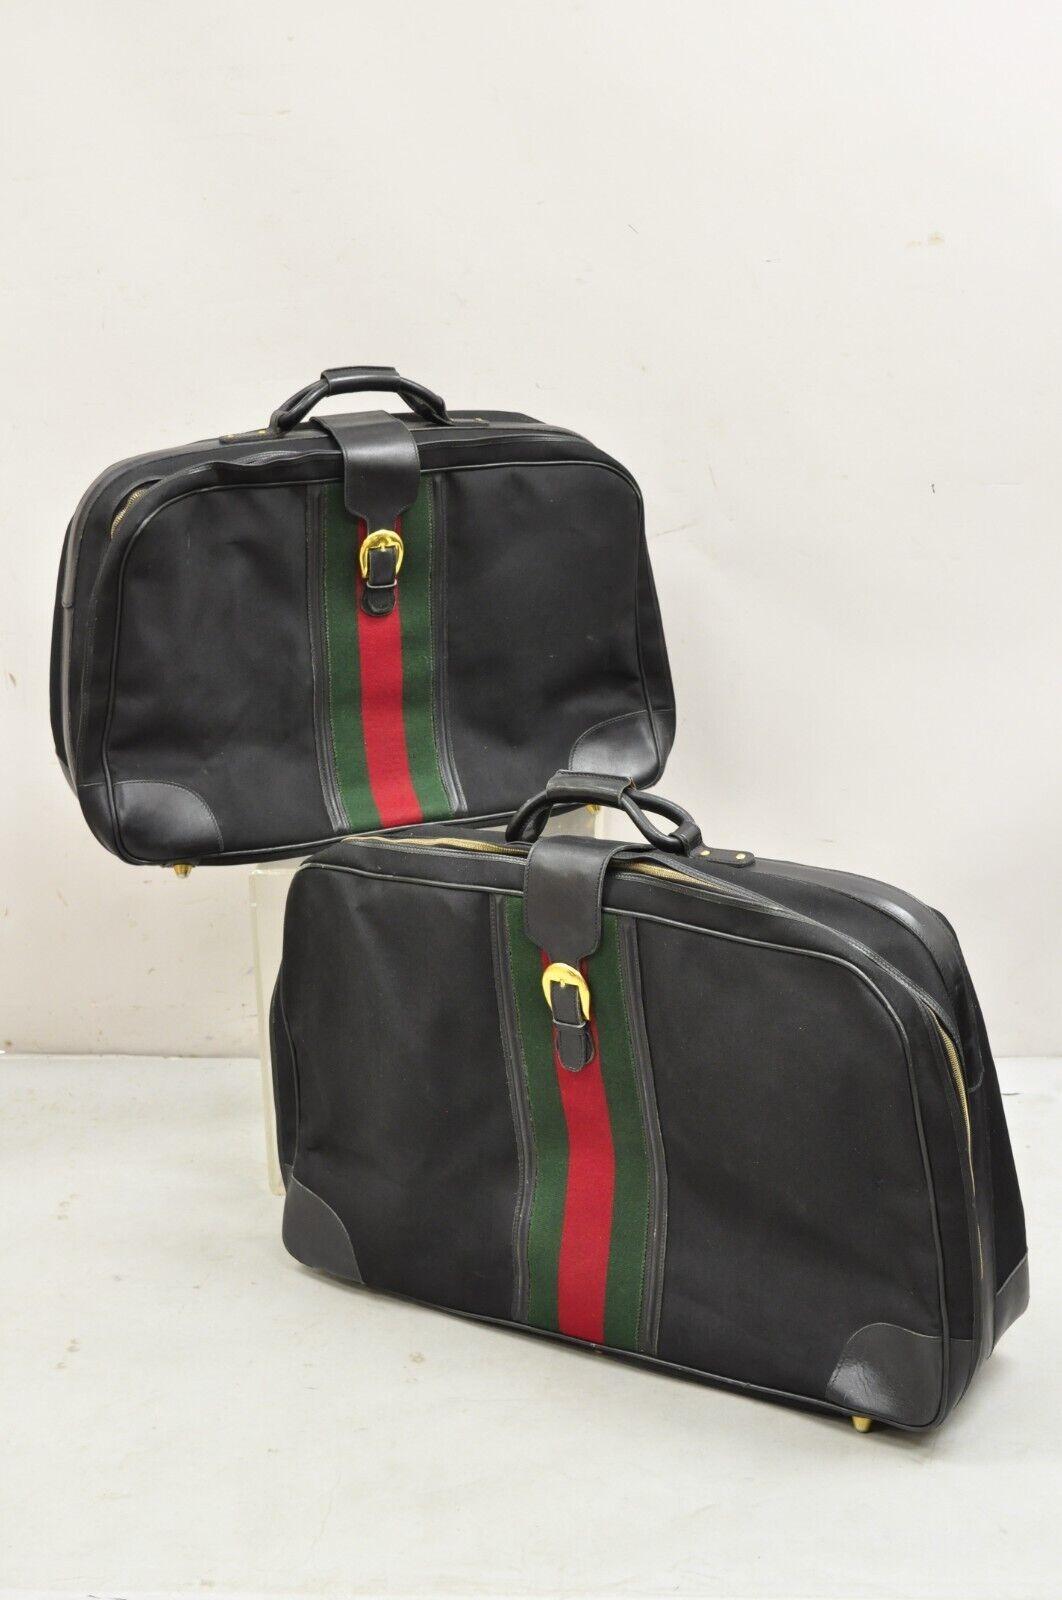 Vintage Gucci Black Canvas & Leather Suitcase Luggage His and Hers Set -2 Pc (B) For Sale 7